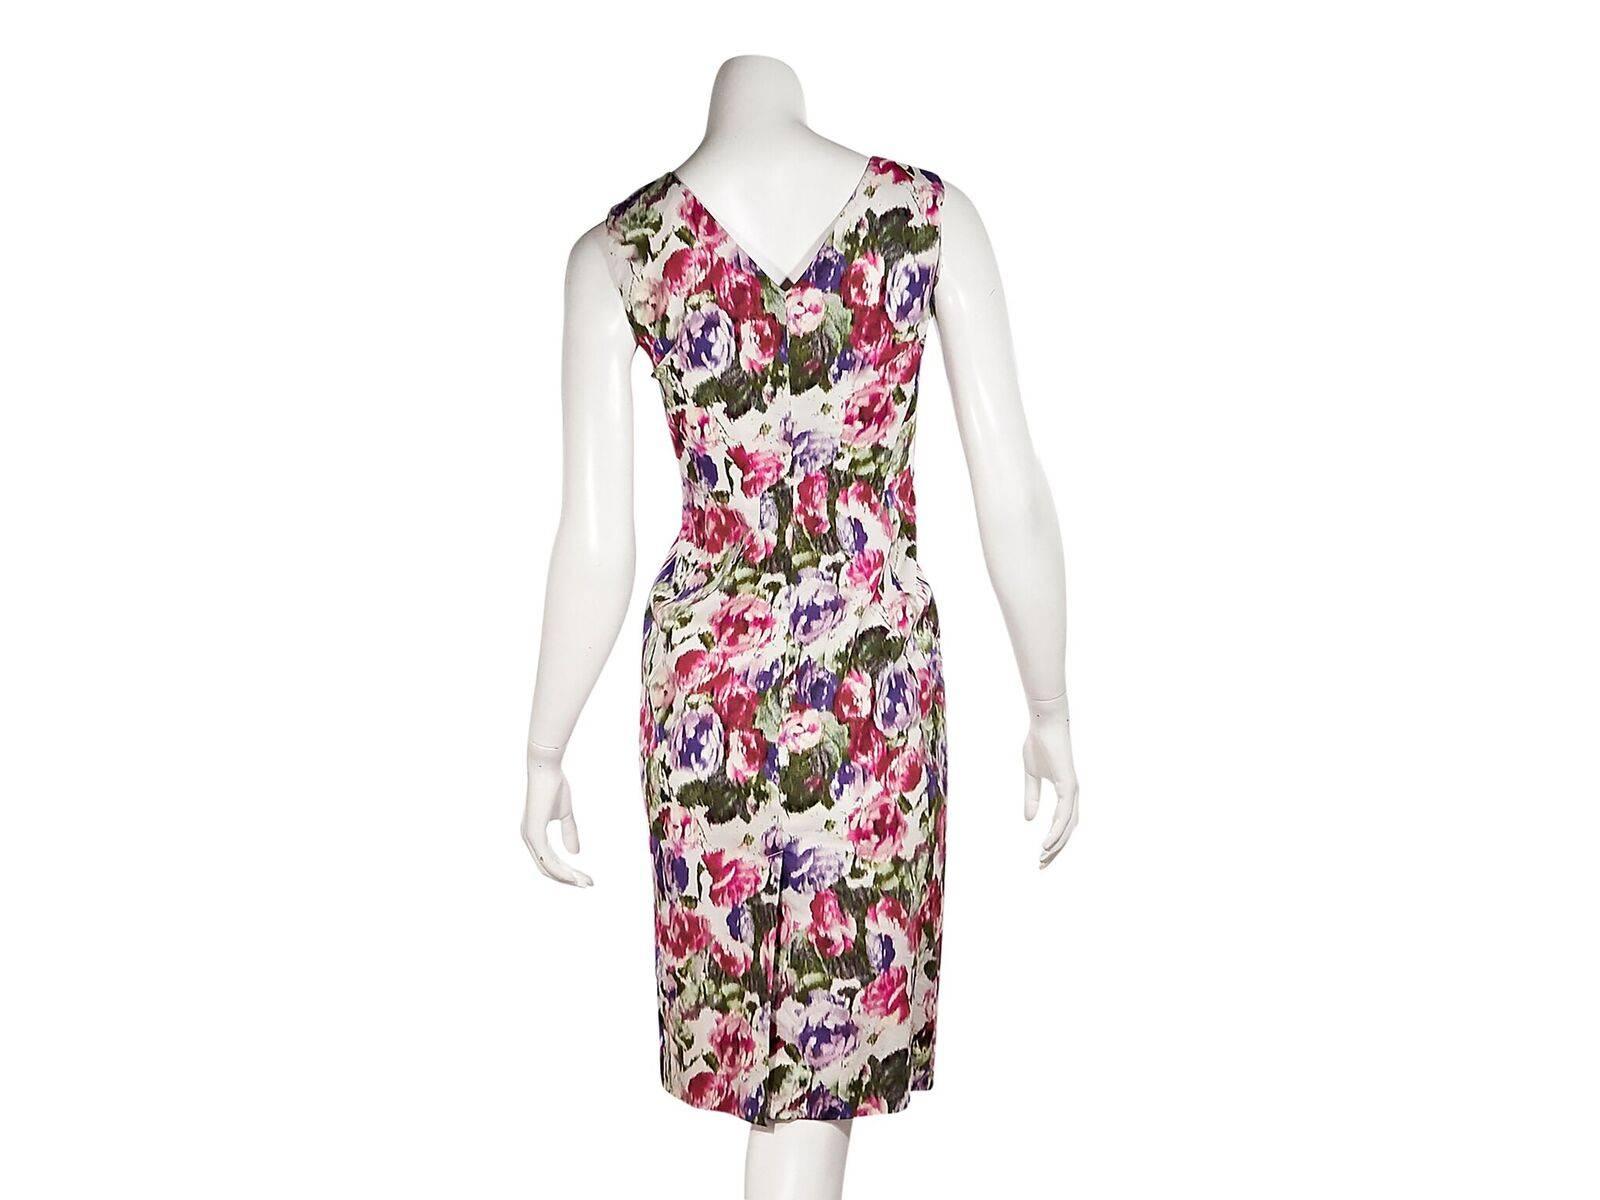 Product details:  Multicolor floral sheath dress by Philosophy di Alberta Ferretti.  V-neck.  Sleeveless.  Concealed side zip closure.  V-back.  Back center hem vent.  
Condition: Pre-owned. New with tags.
Est. Retail $388